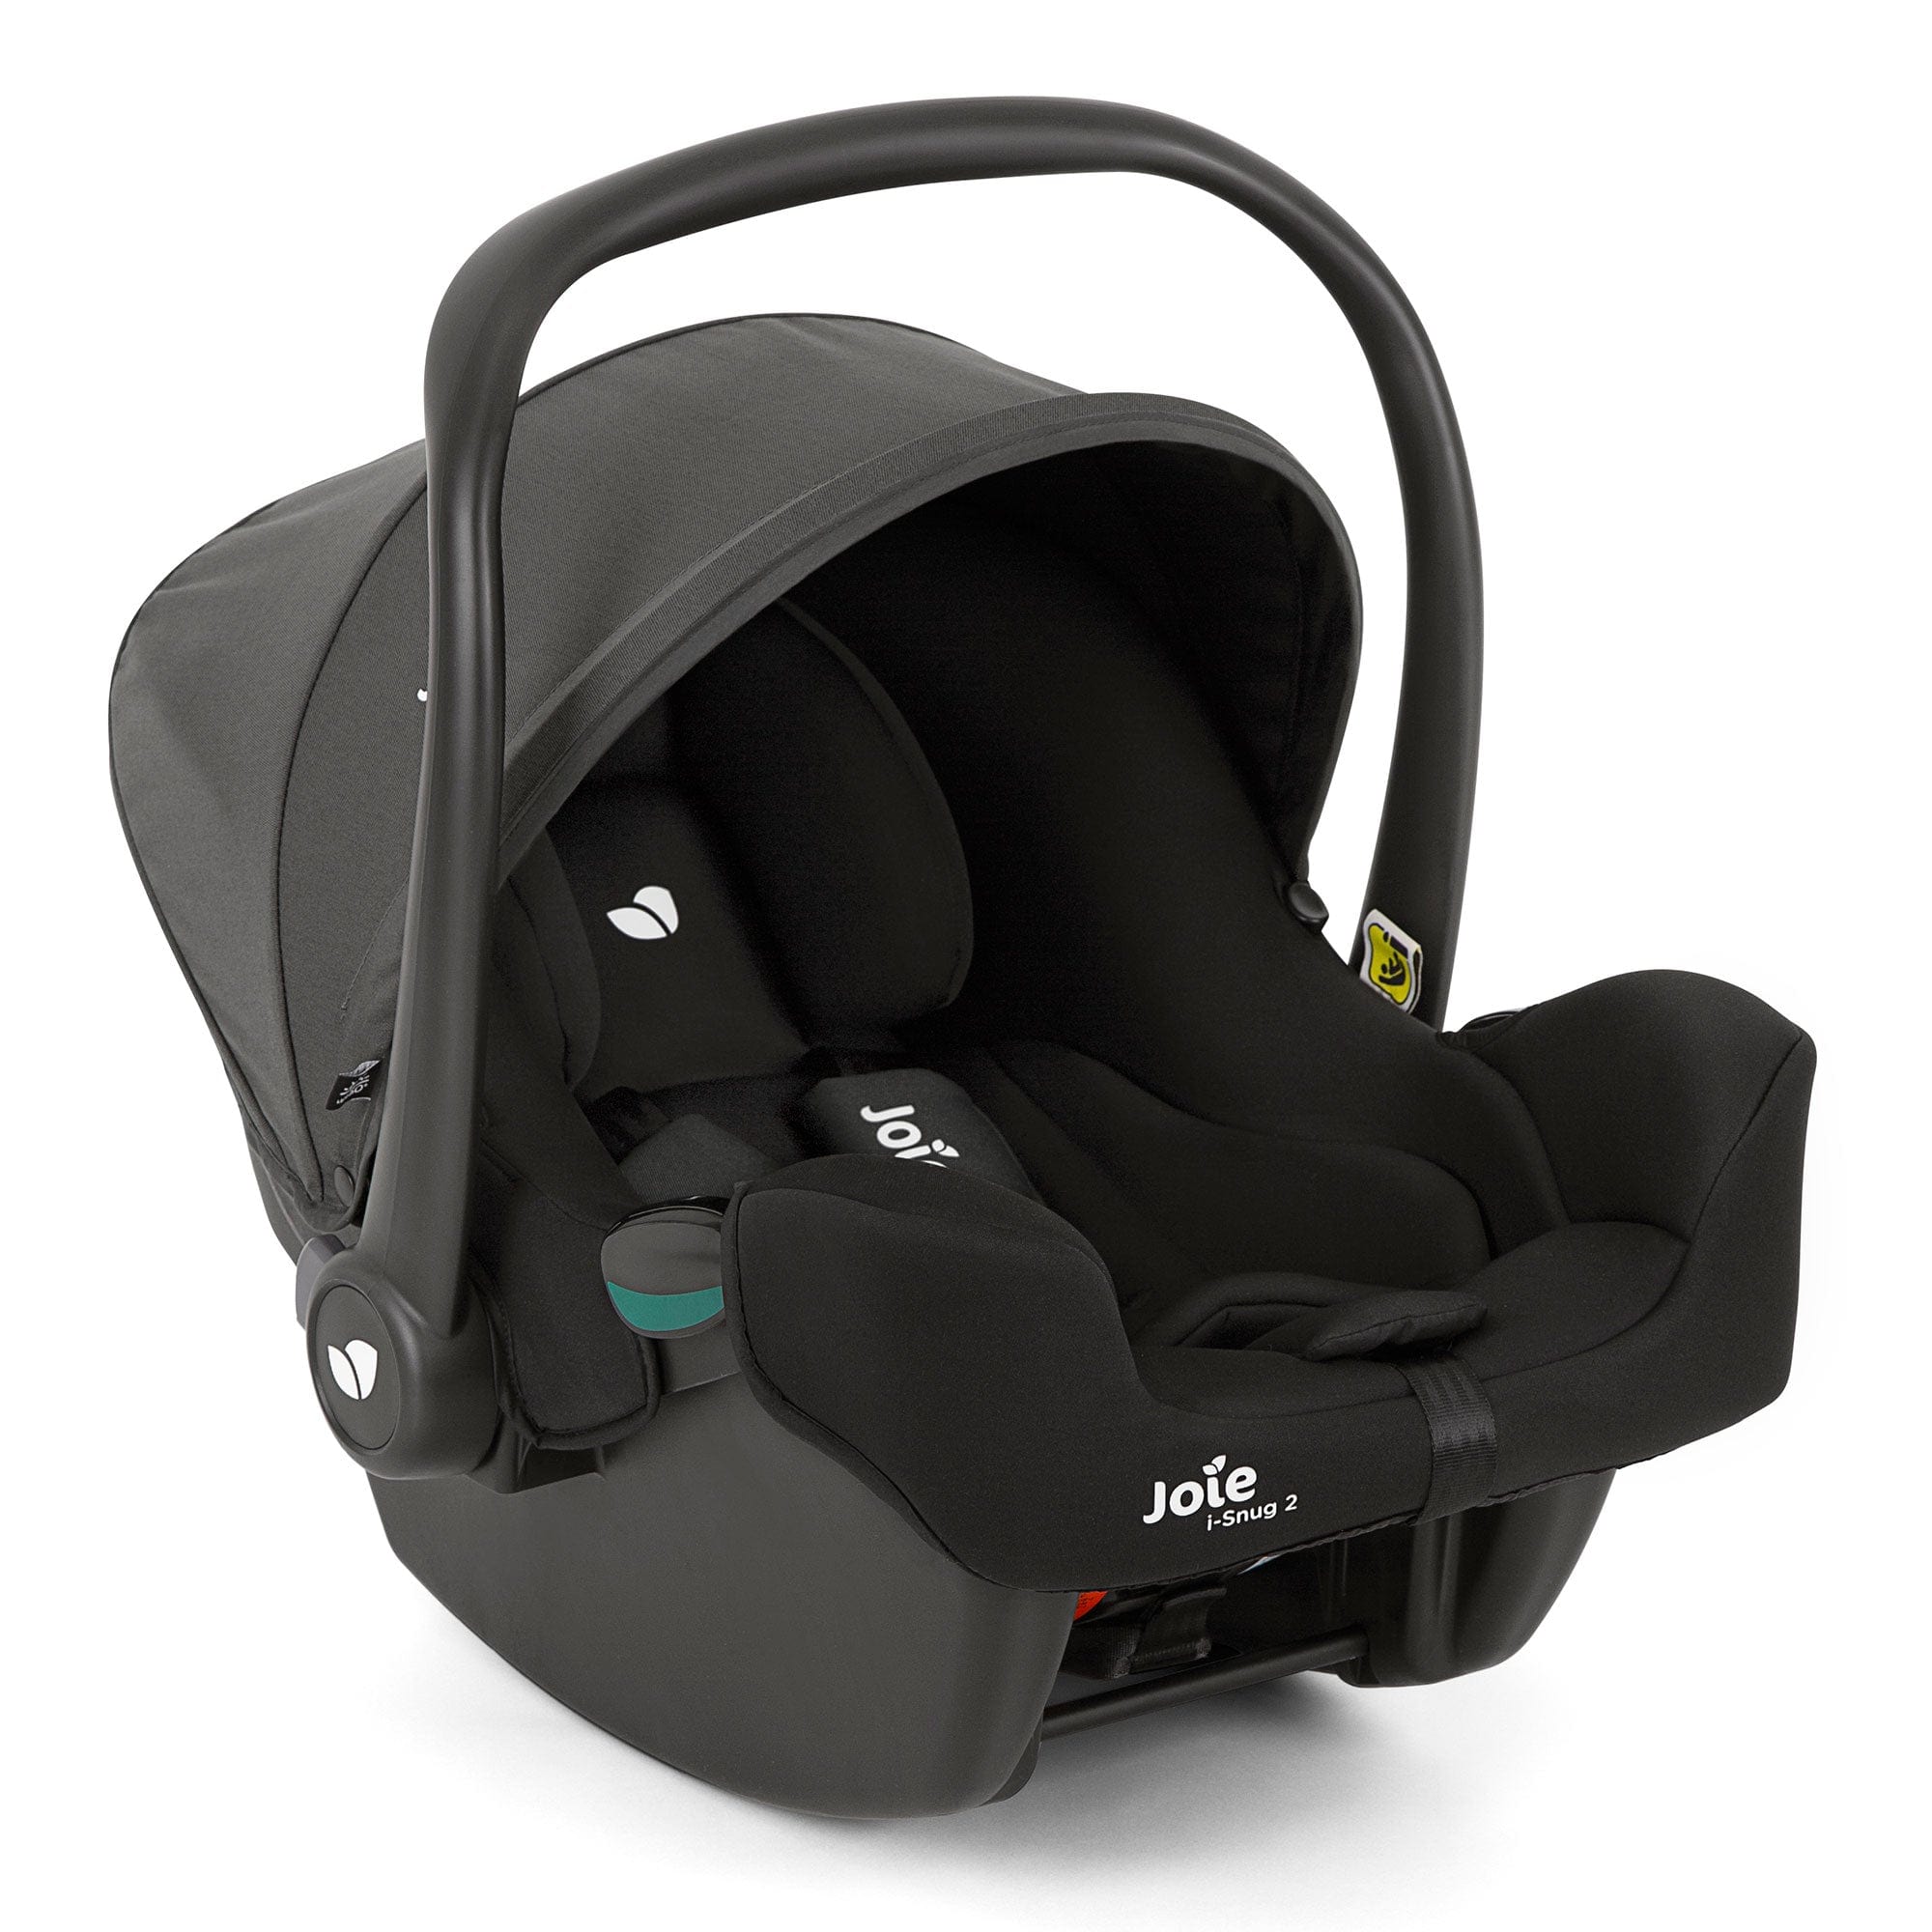 Joie i-Snug 2 i-Size Car Seat in Shale Toddler Car Seats C1817CAPEB000 5056080614984